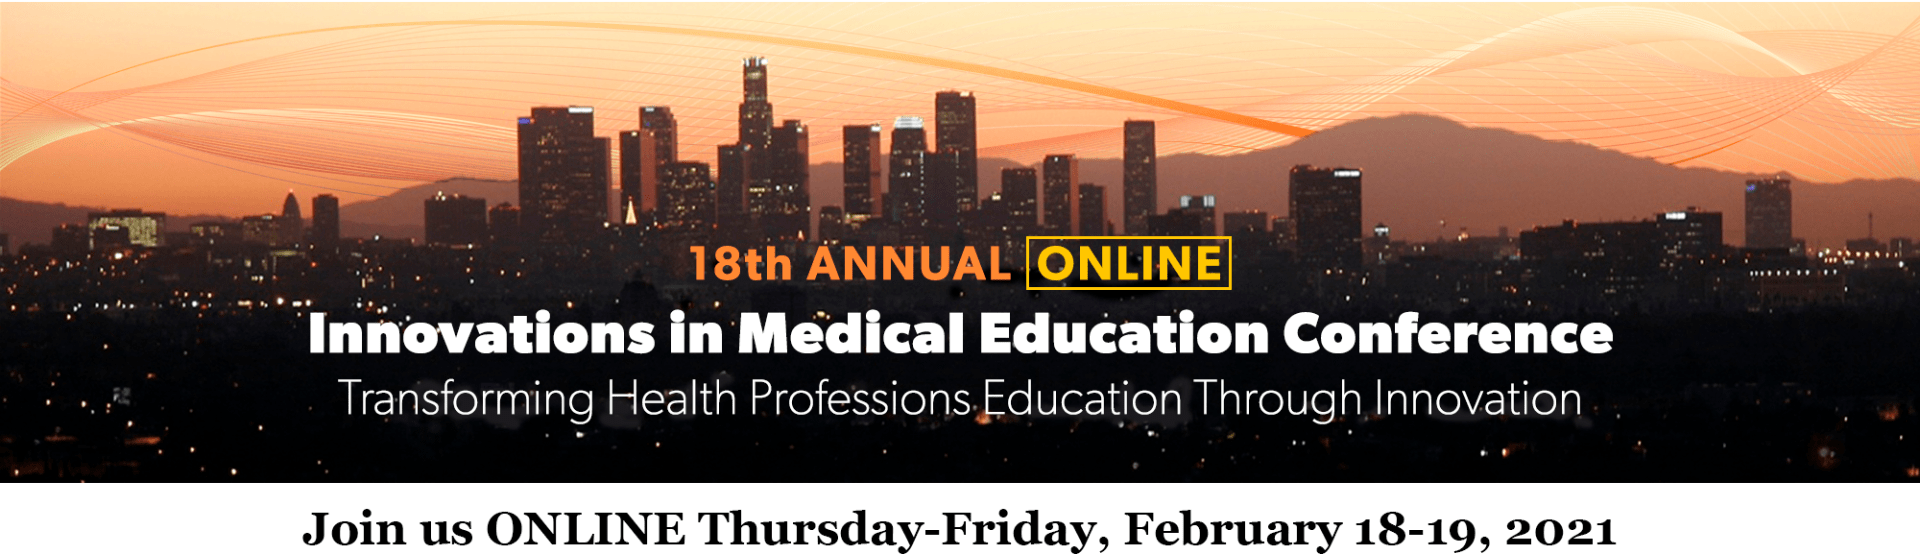 Innovations in Medical Education Online Conference 2021